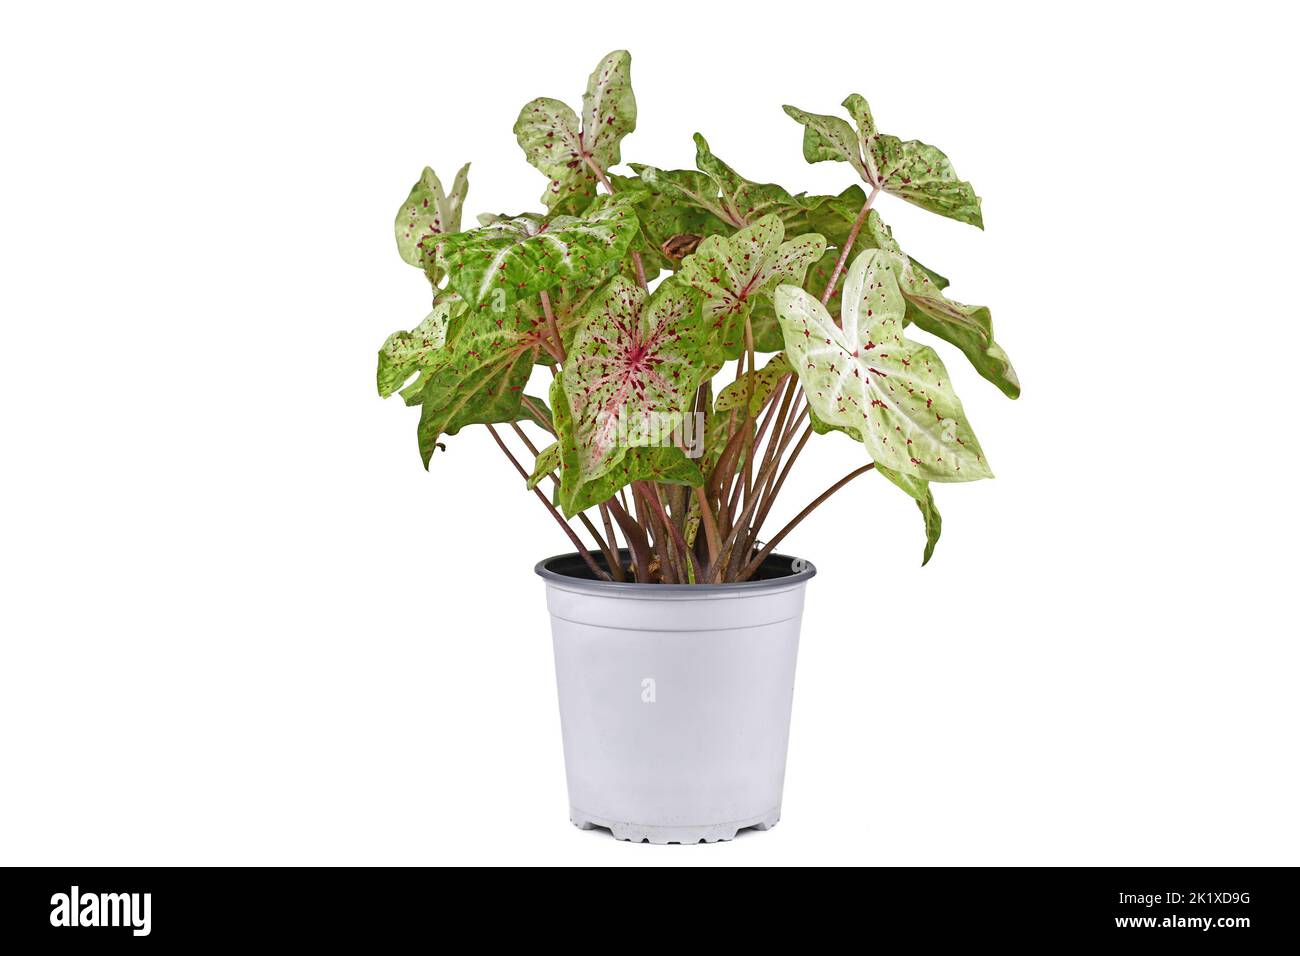 Exotic 'Caladium Miss Muffet' houseplant with pink and green leaves with red dots in pot on white background Stock Photo